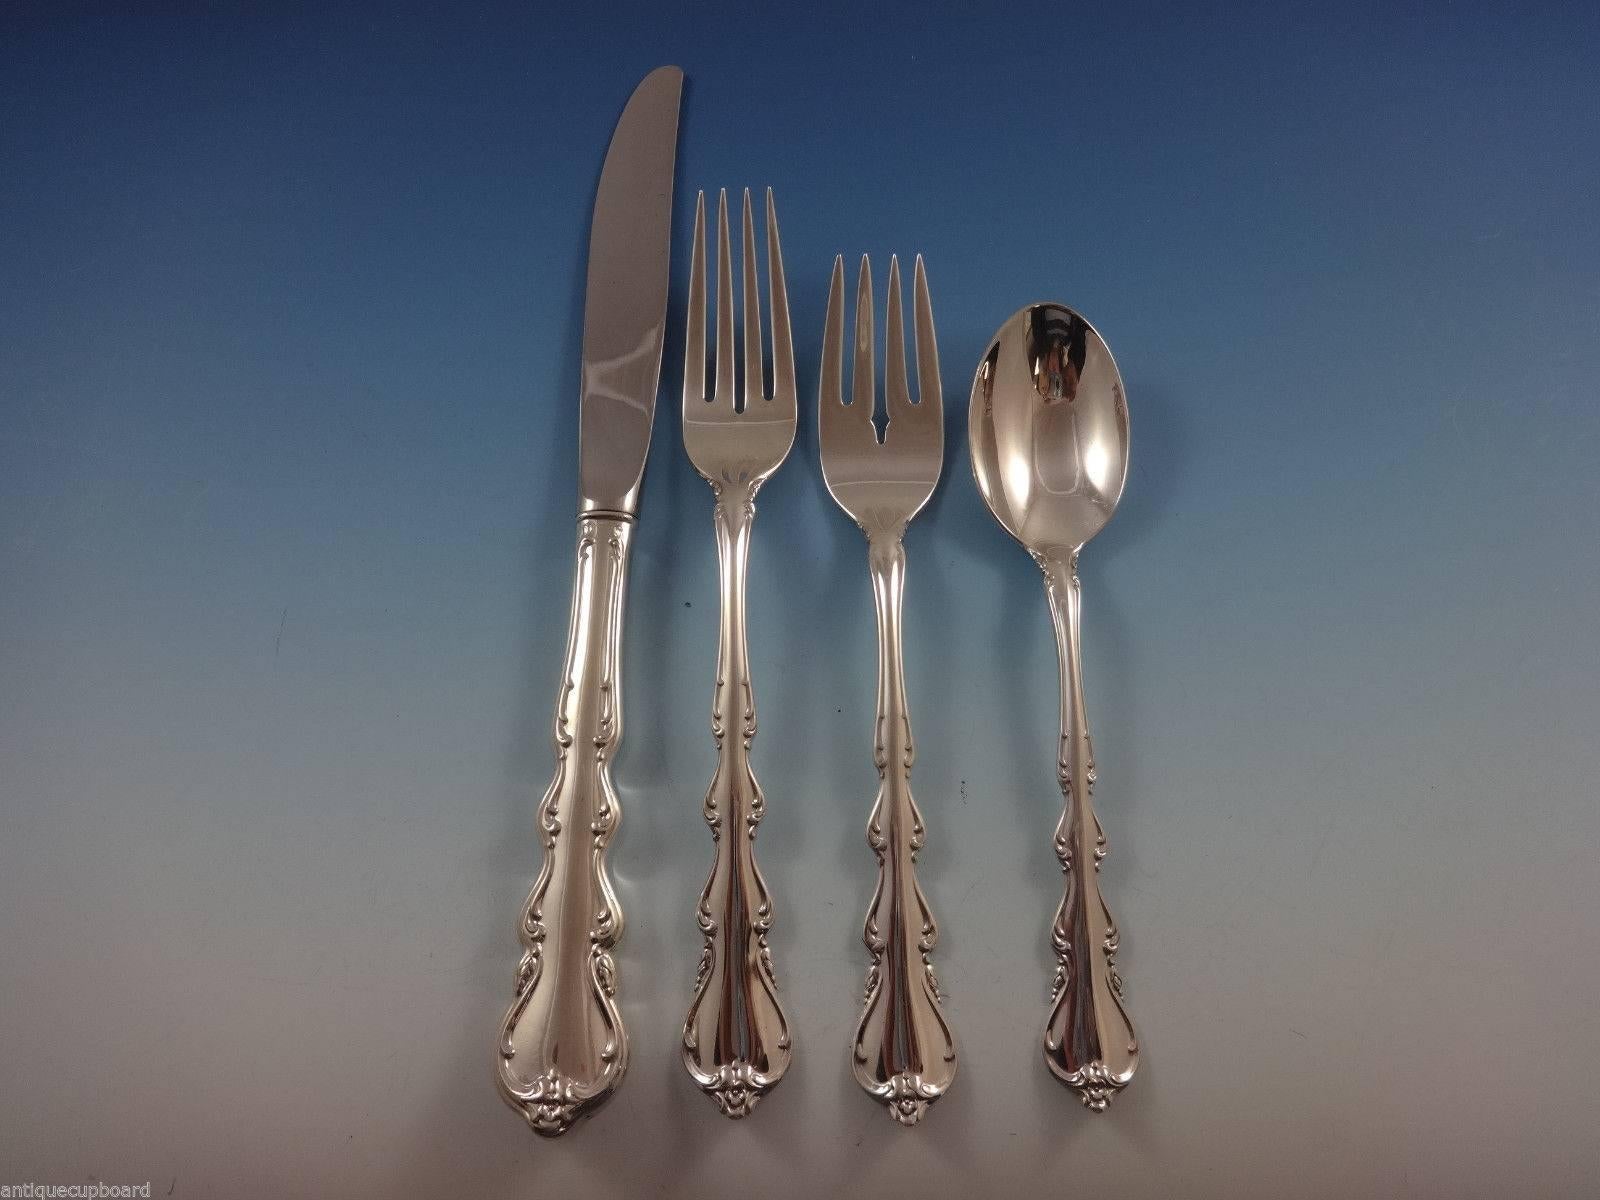 Monumental Angelique by International sterling silver flatware set for 18, 114 pieces. This set includes:

18 knives, 9 1/4